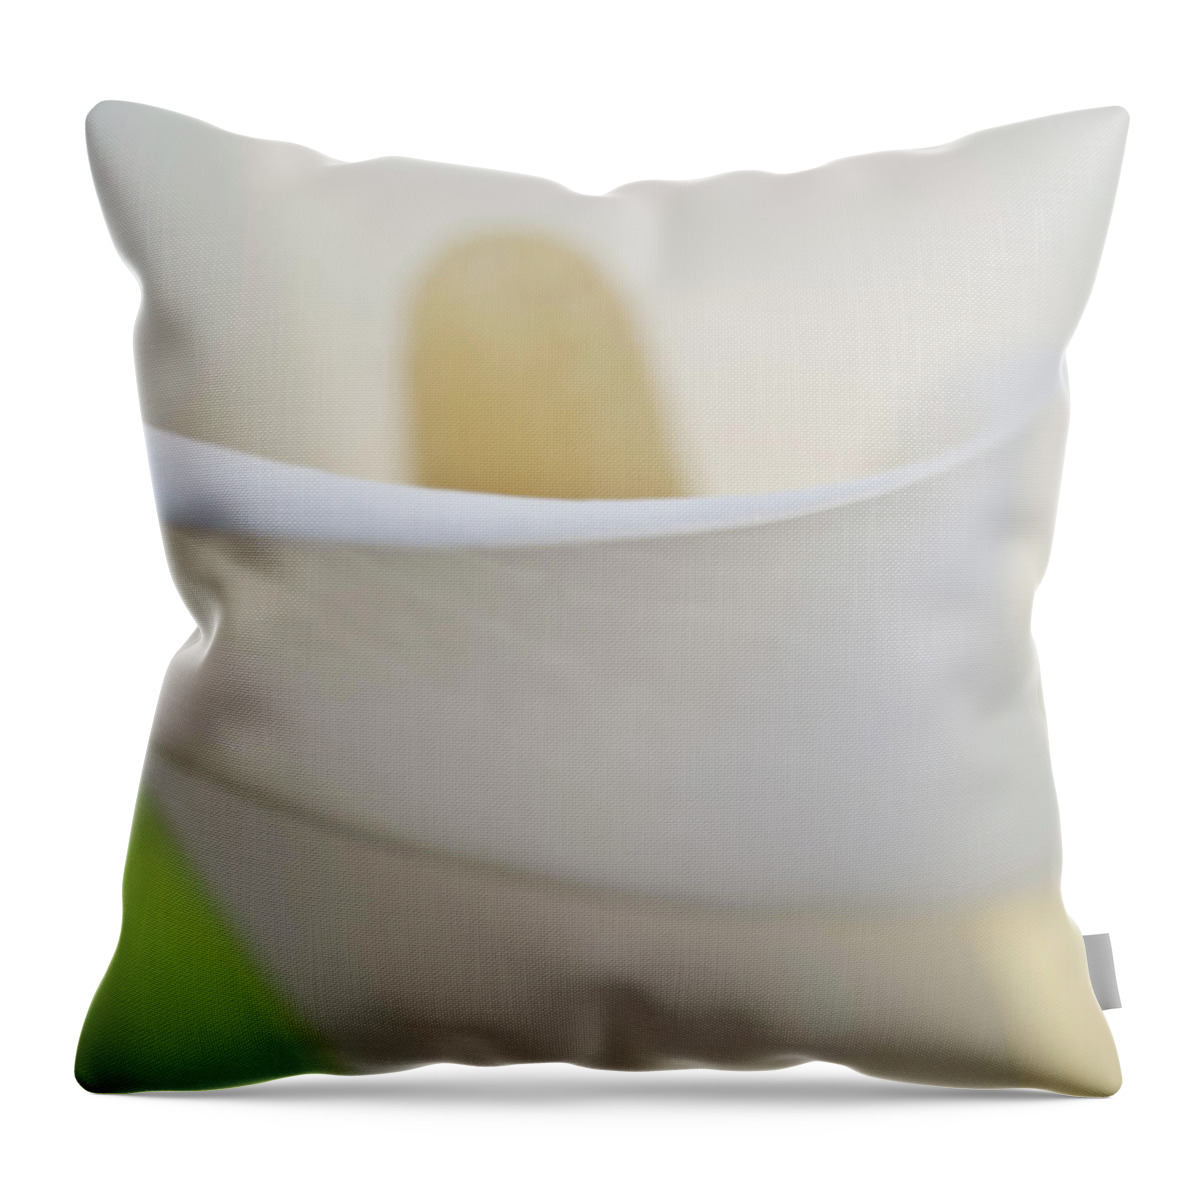 Abstract Throw Pillow featuring the photograph Calla Details 7 by Heiko Koehrer-Wagner